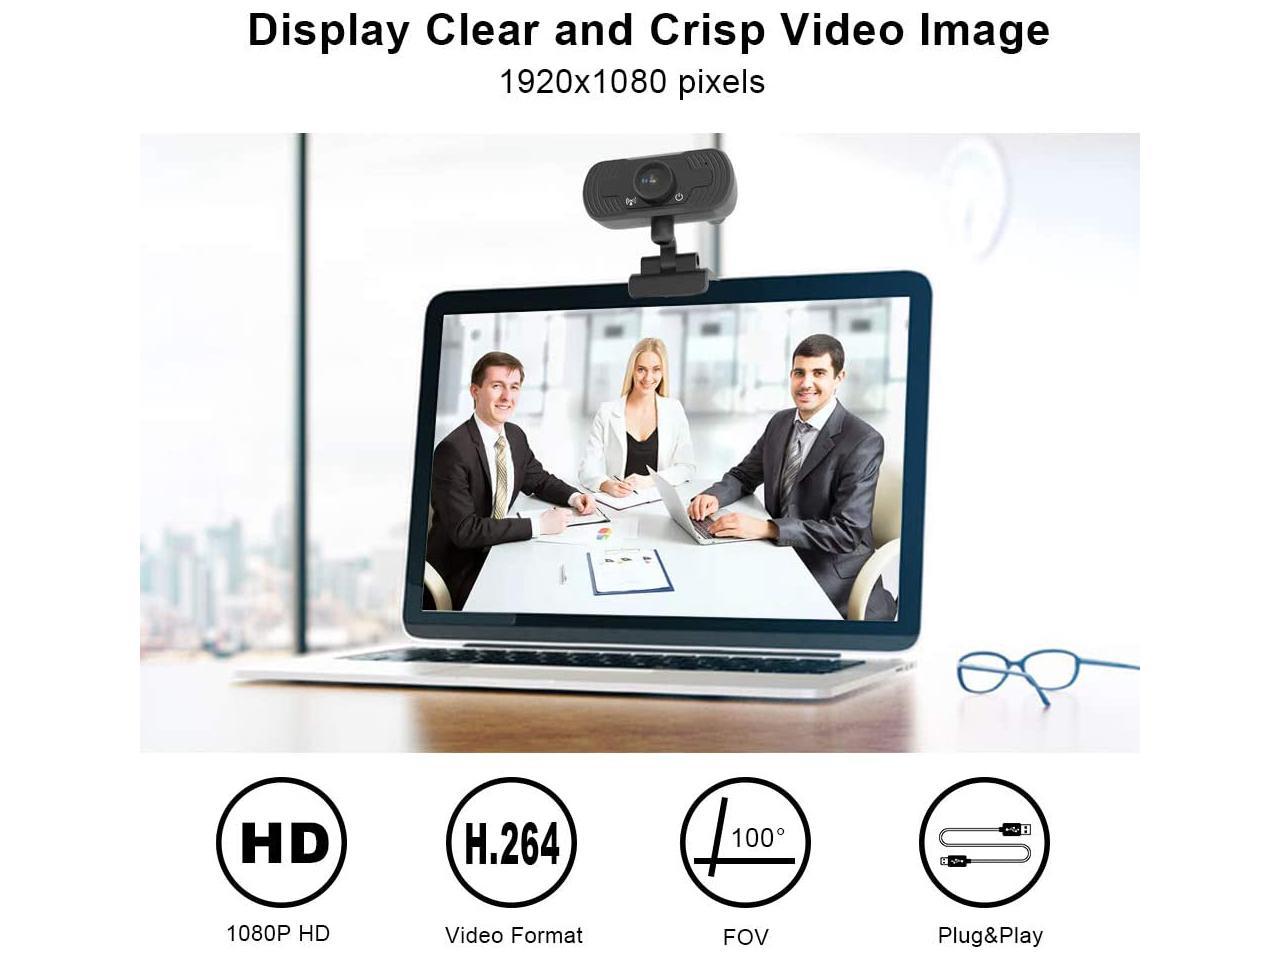 Webcam 1080P,FUVISION Webcam with Microphone,Web Camera for Computers with Auto Focus,HD Web Cam for Zoom Video Conference,YouTube,Recording,Skype,Stream and Extended View for PC,Desktop or Laptop